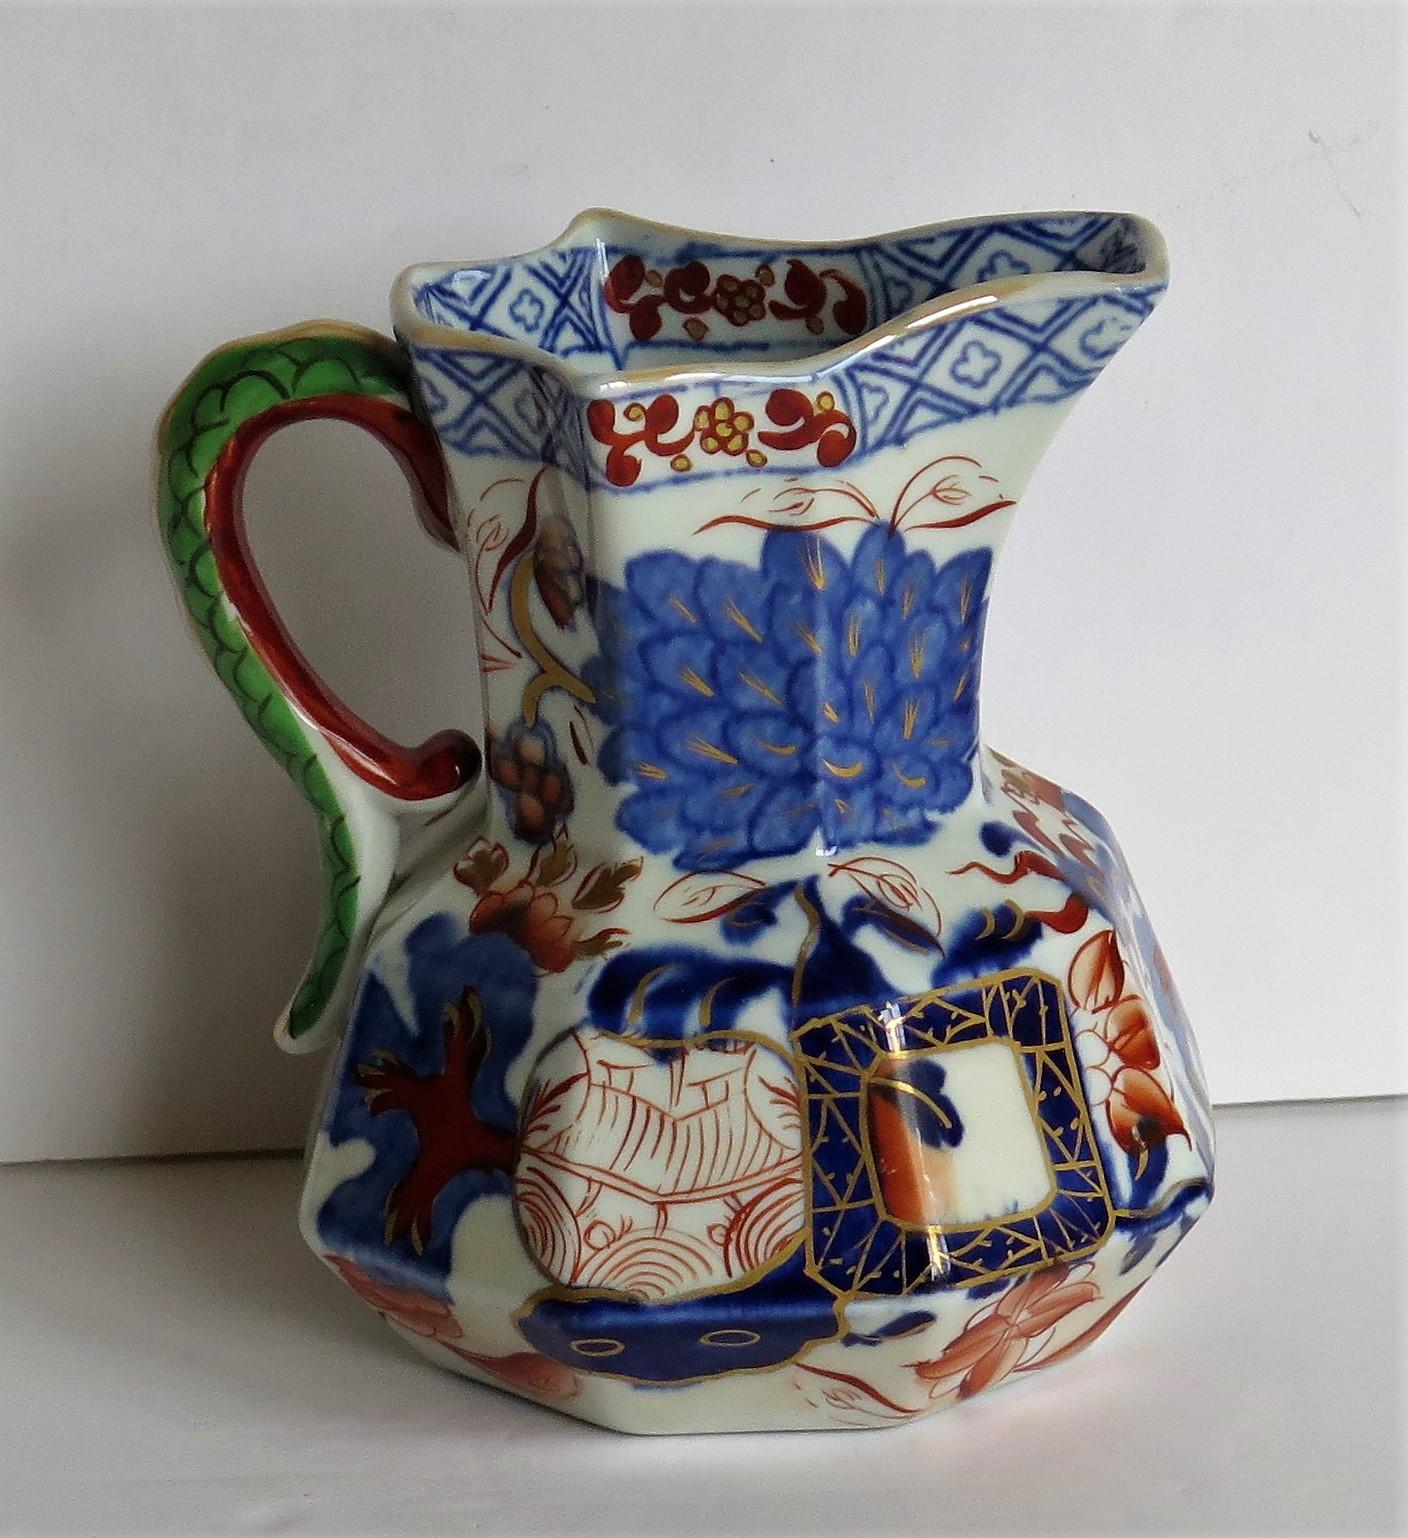 This is a good Hydra jug or pitcher made by the Davenport Company of Longport, Staffordshire, England in the late Georgian period, circa 1805-1820, made of Ironstone pottery, which Davenport called Stone China.

It is hand decorated in a bold